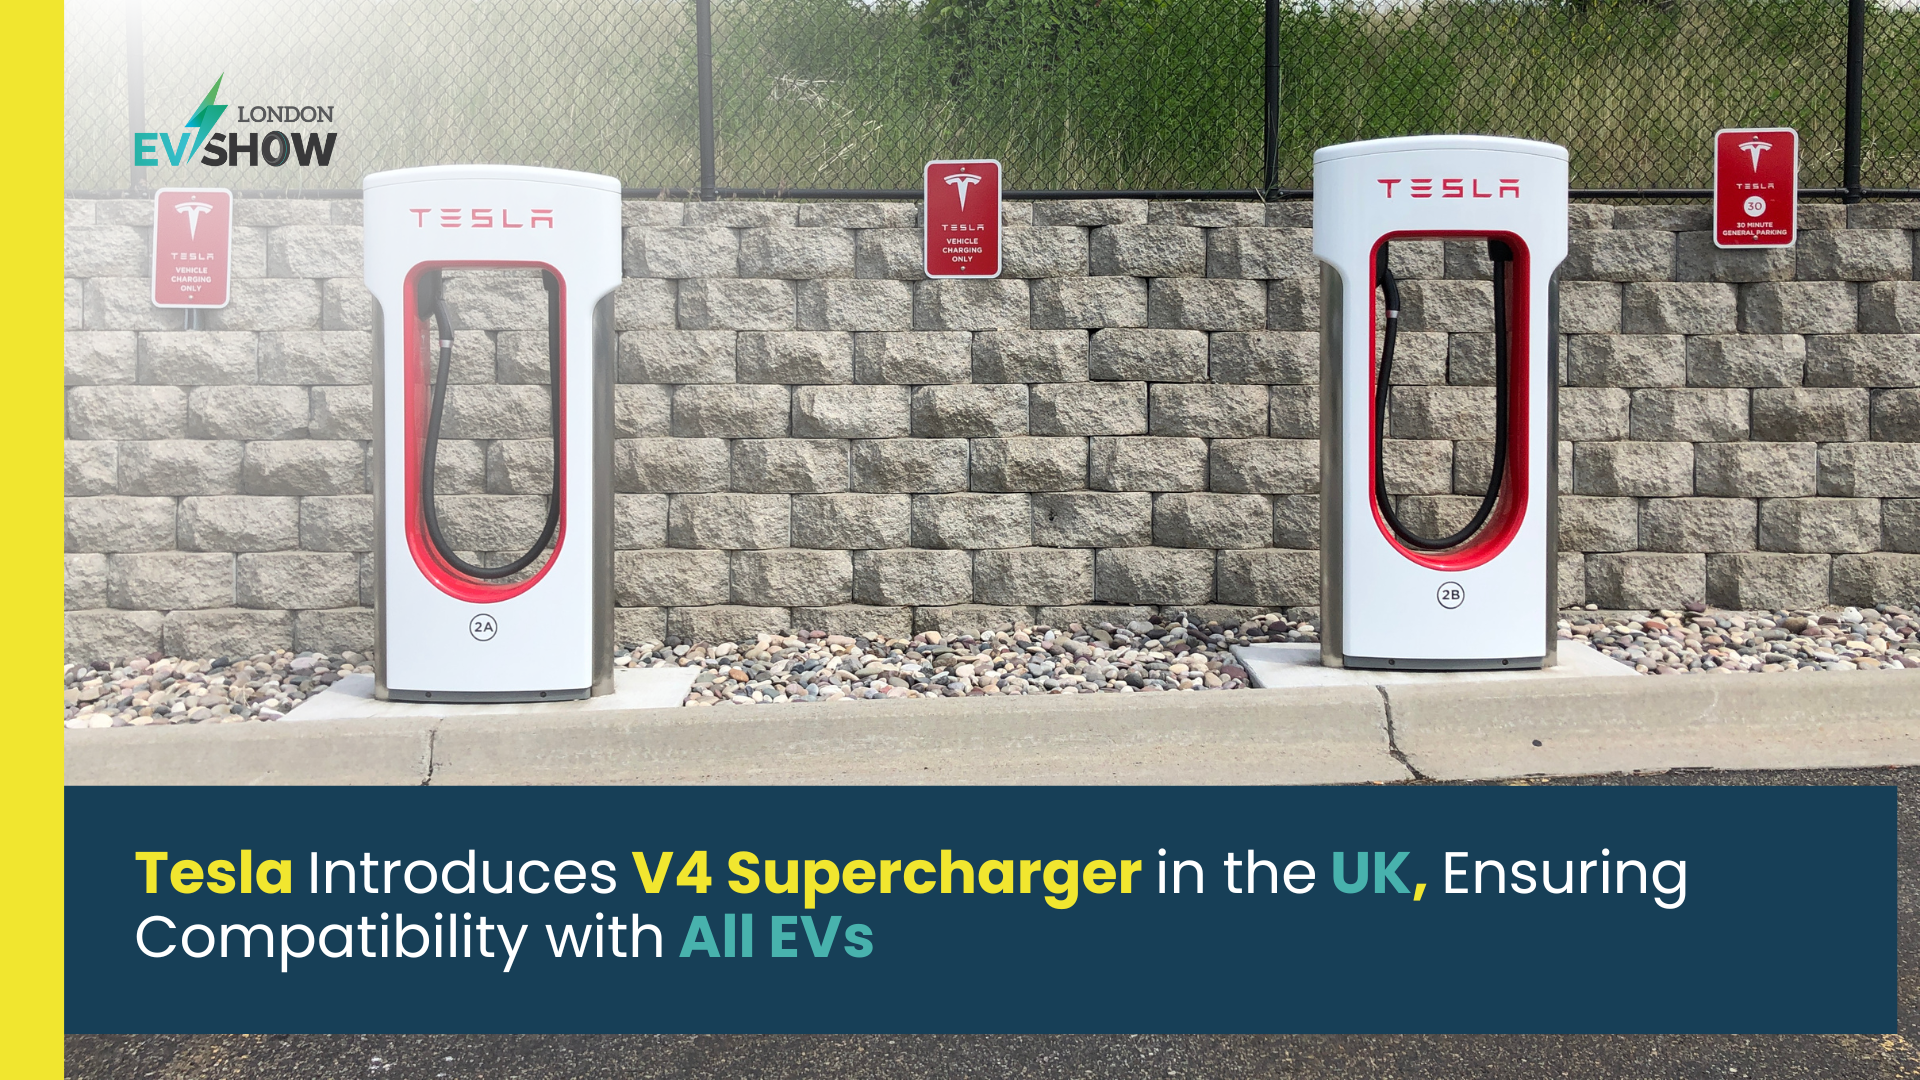 Tesla Introduces V4 Supercharger in the UK, Ensuring Compatibility with All EVs